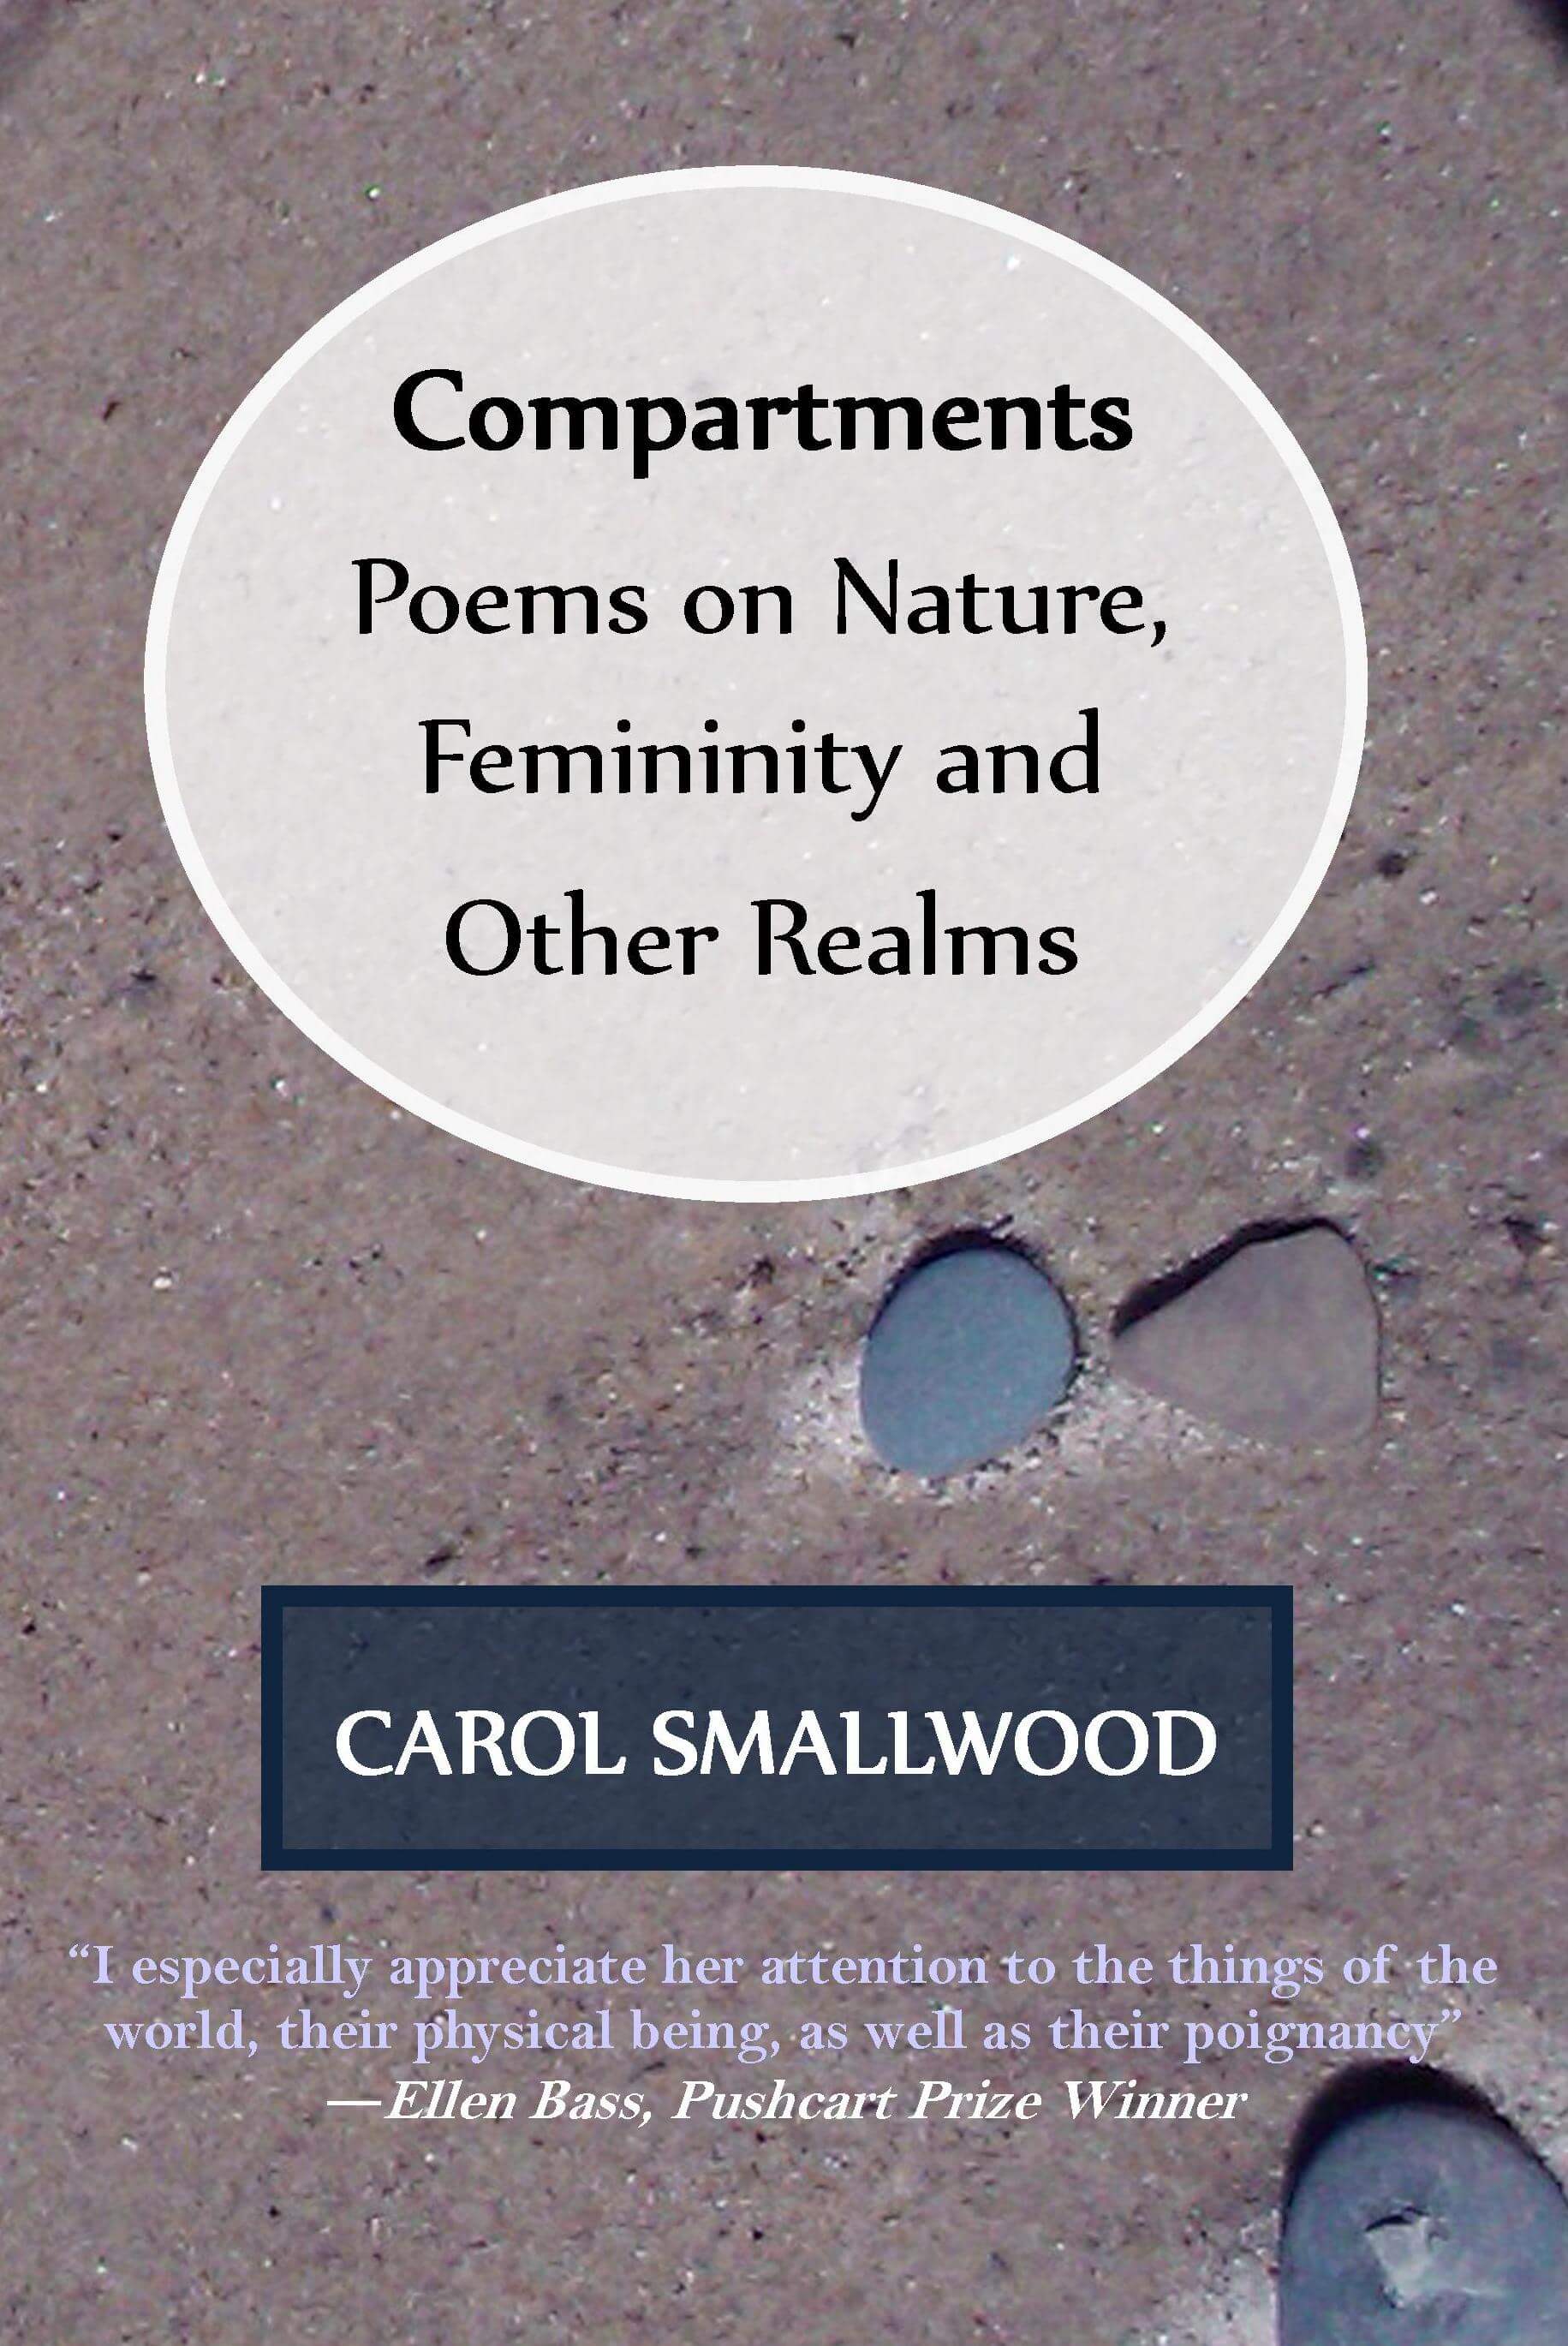 Compartments Poems on Nature Femininity and Other Realms book cover by Carol Smallwood